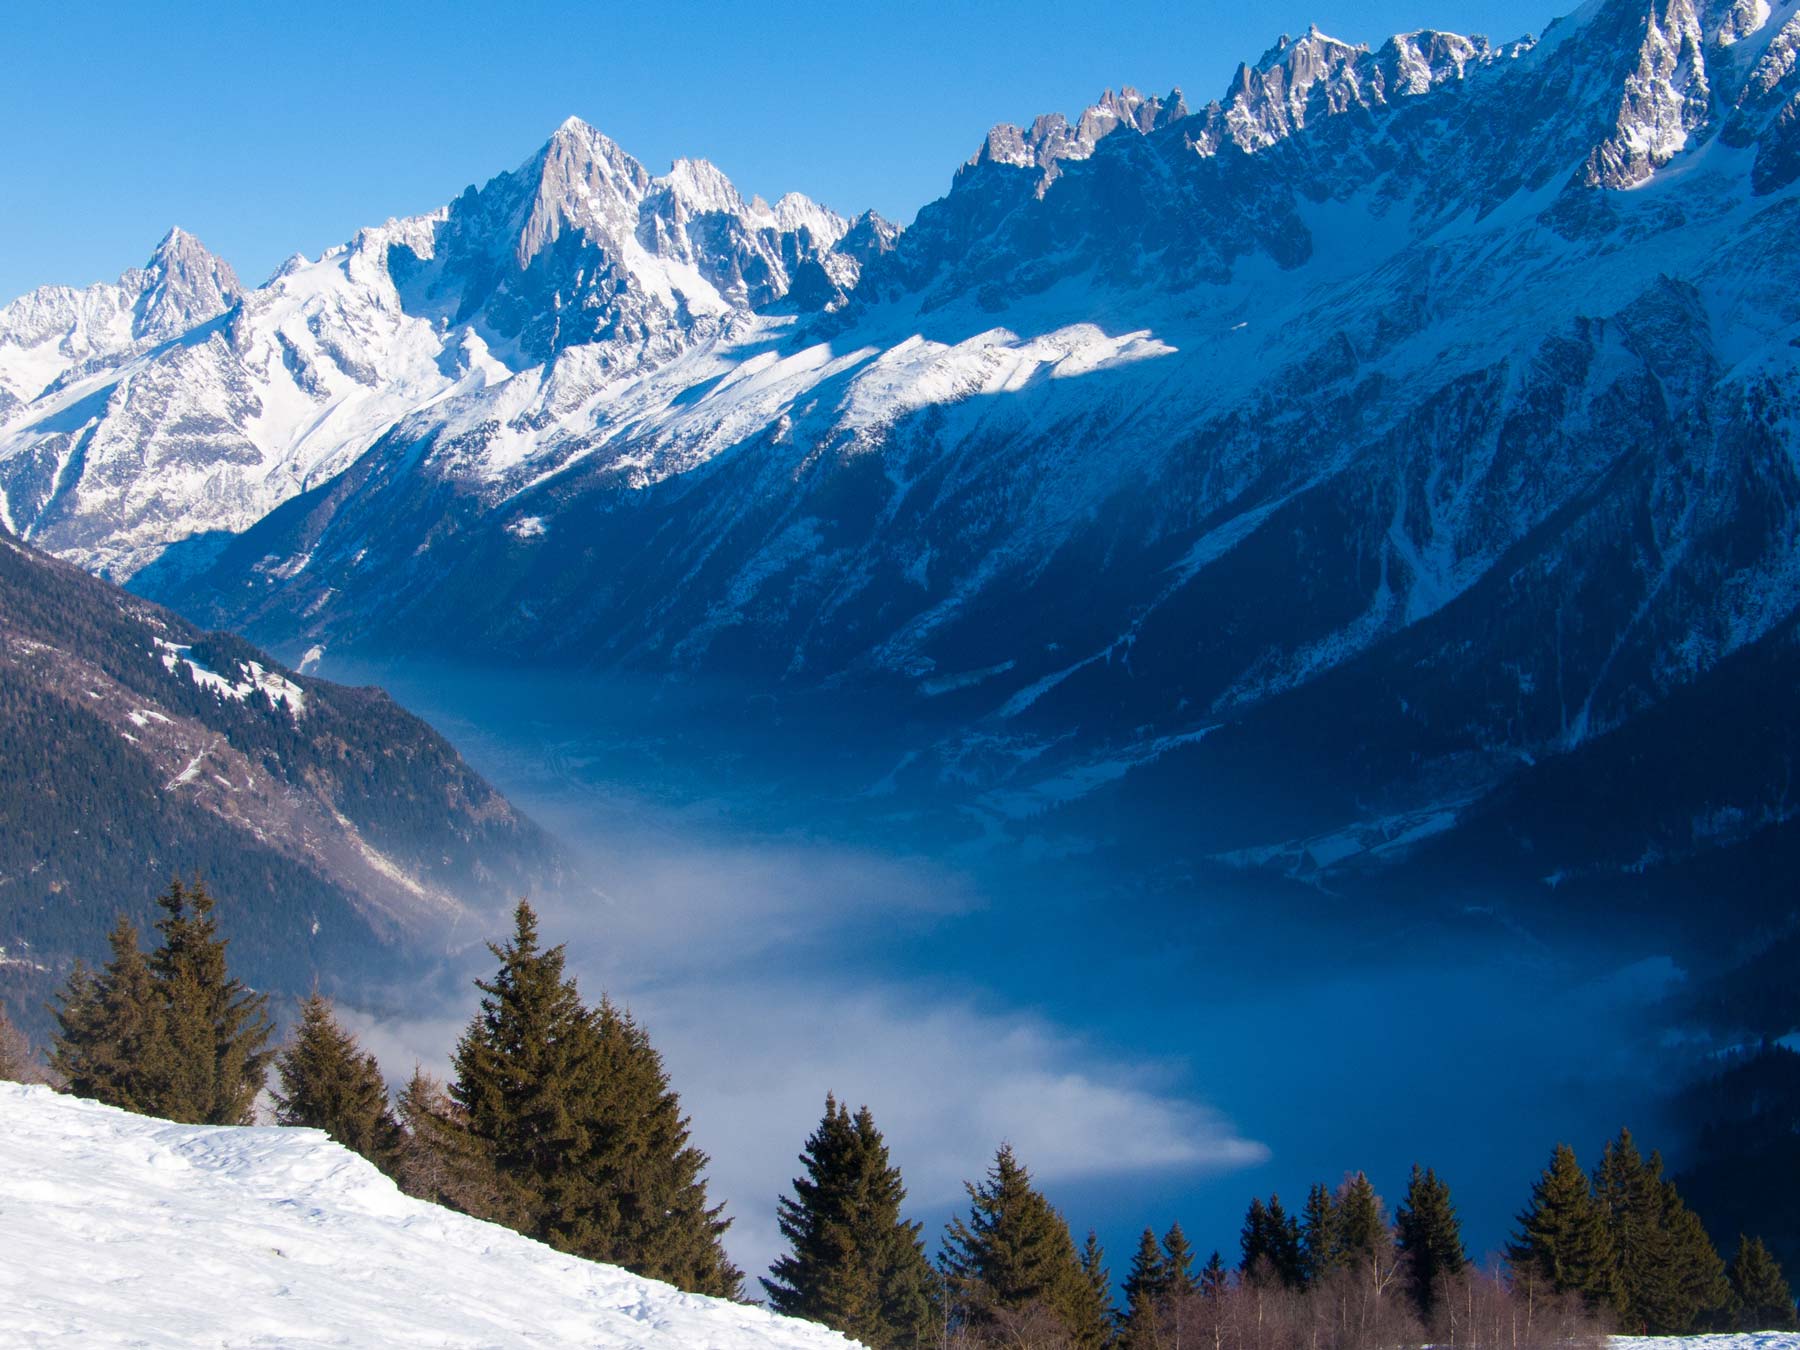 View from Vallorcine down the Chamonix Valley